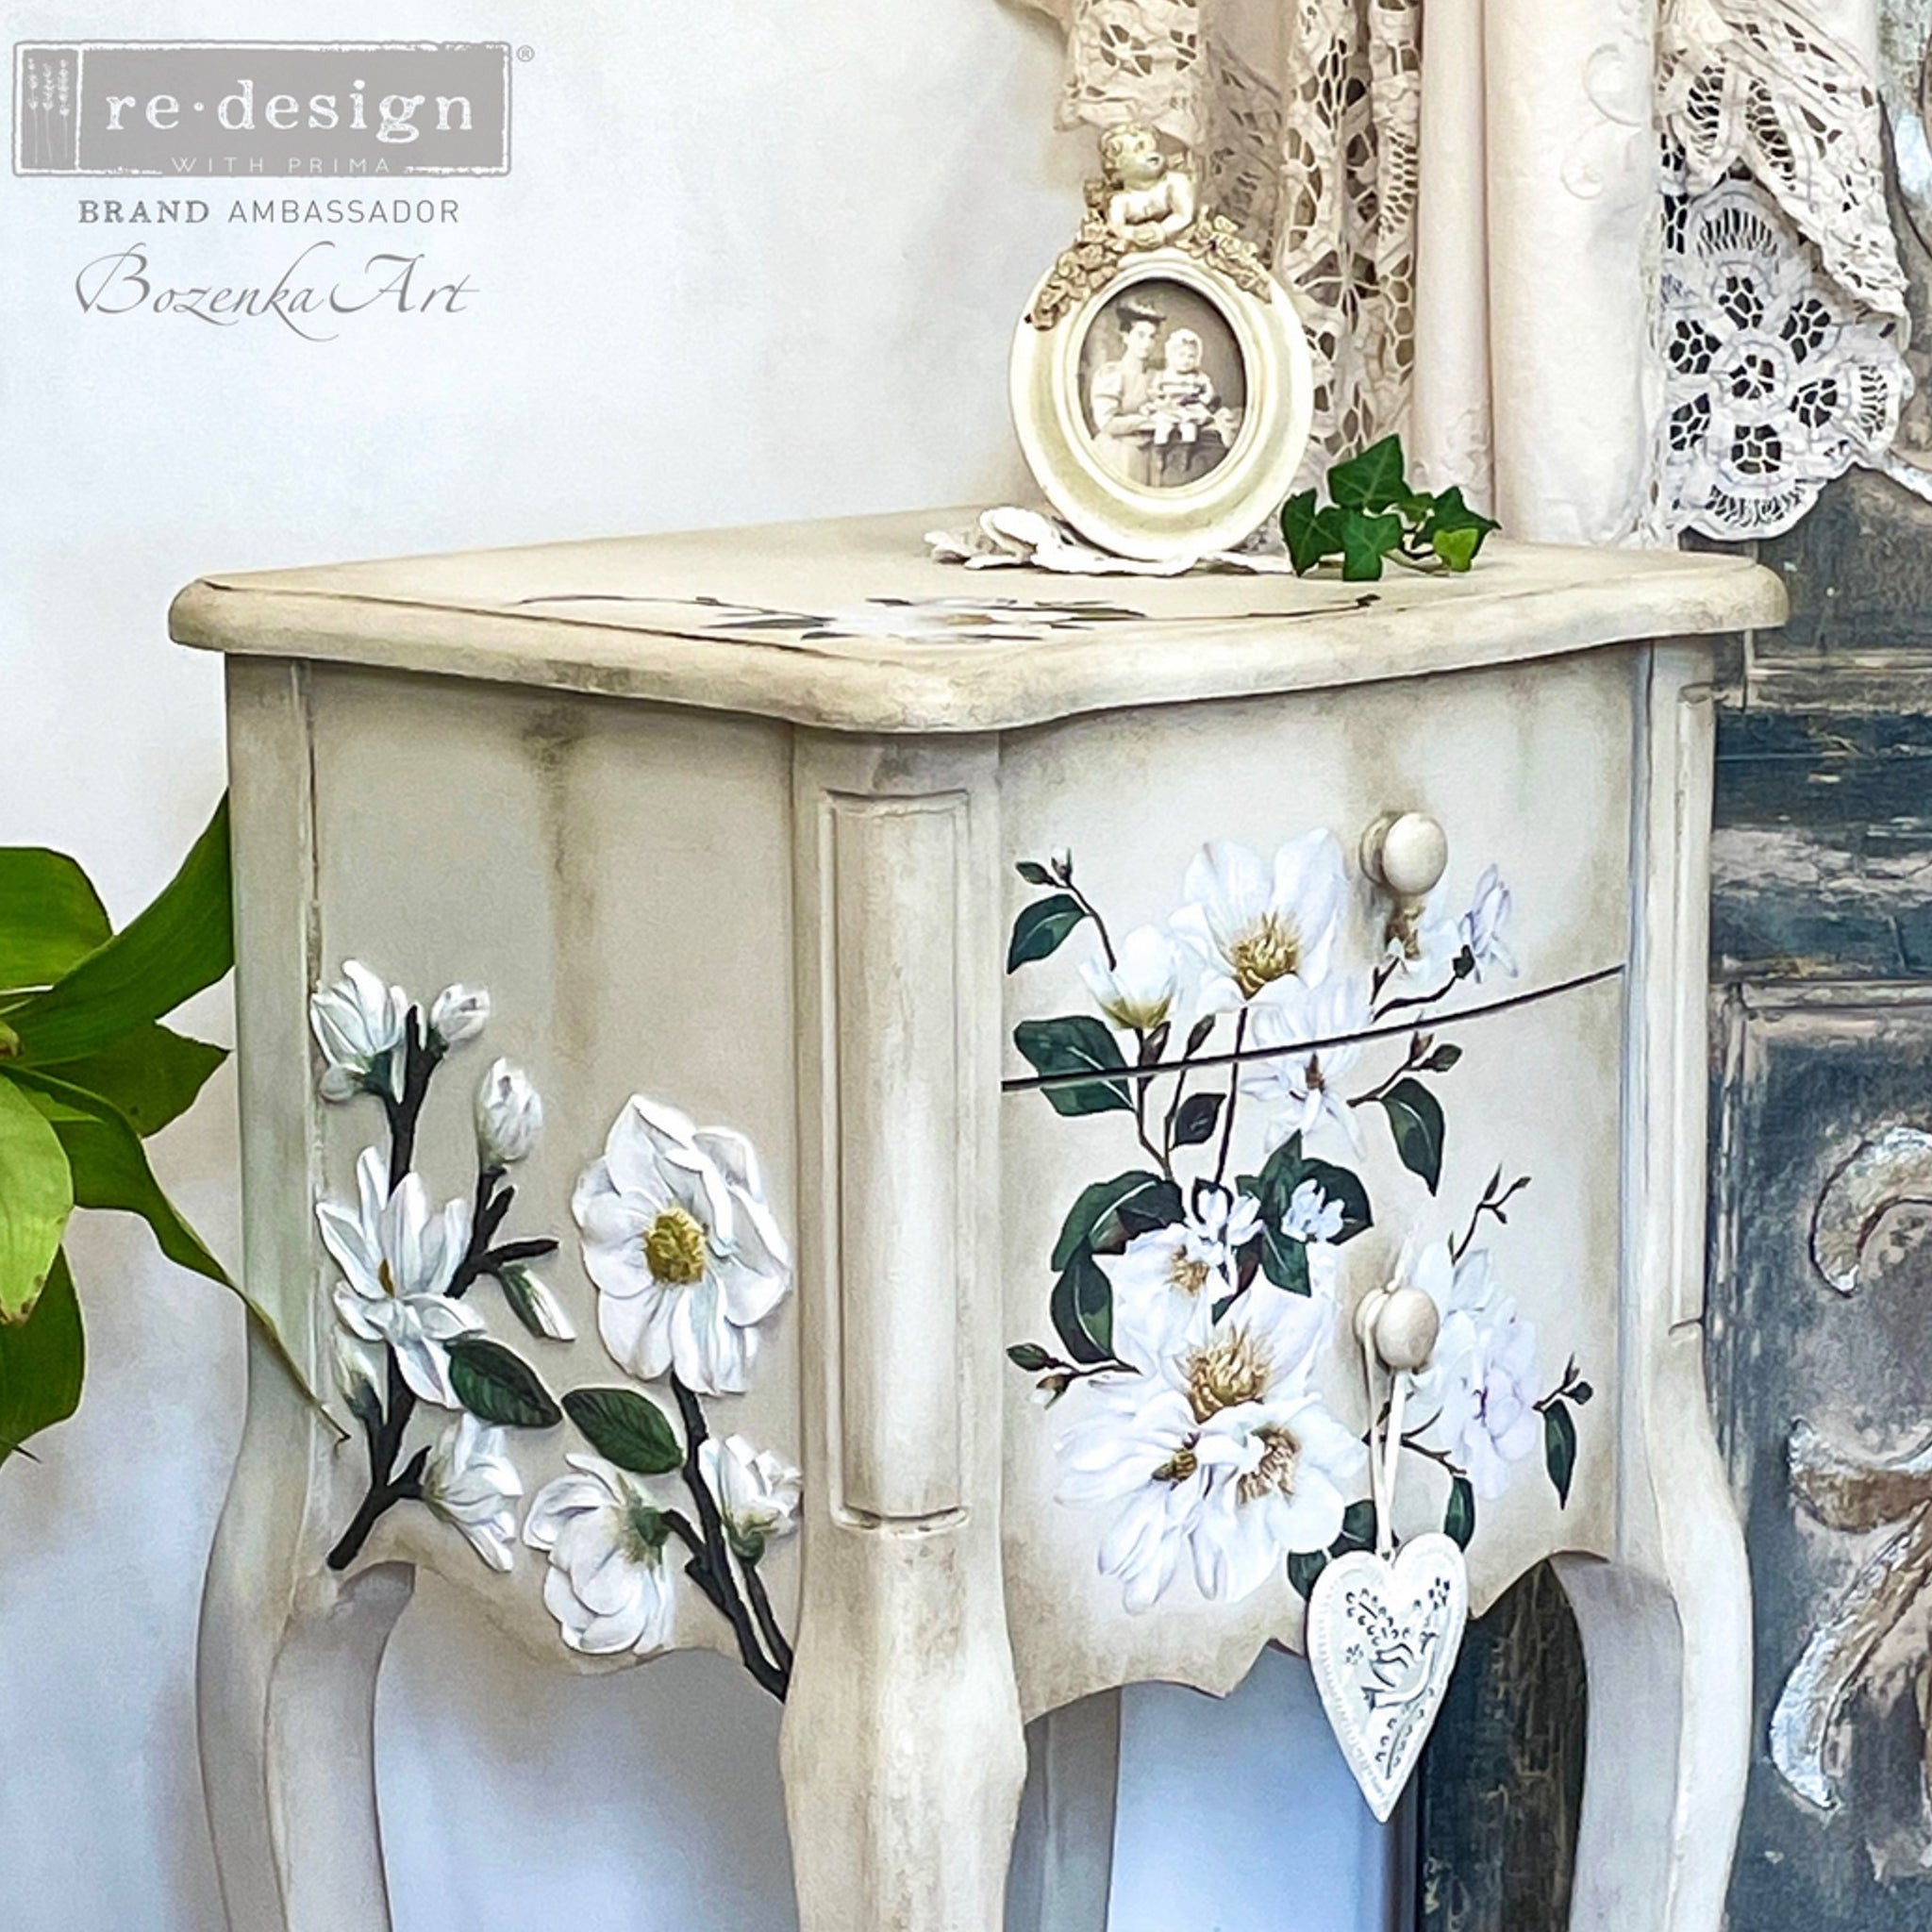 A close-up of a vintage, small, 2-drawer nightstand refurbished by Bozenka Art is painted antique white and features ReDesign with Prima's White Magnolia Small transfer on it.